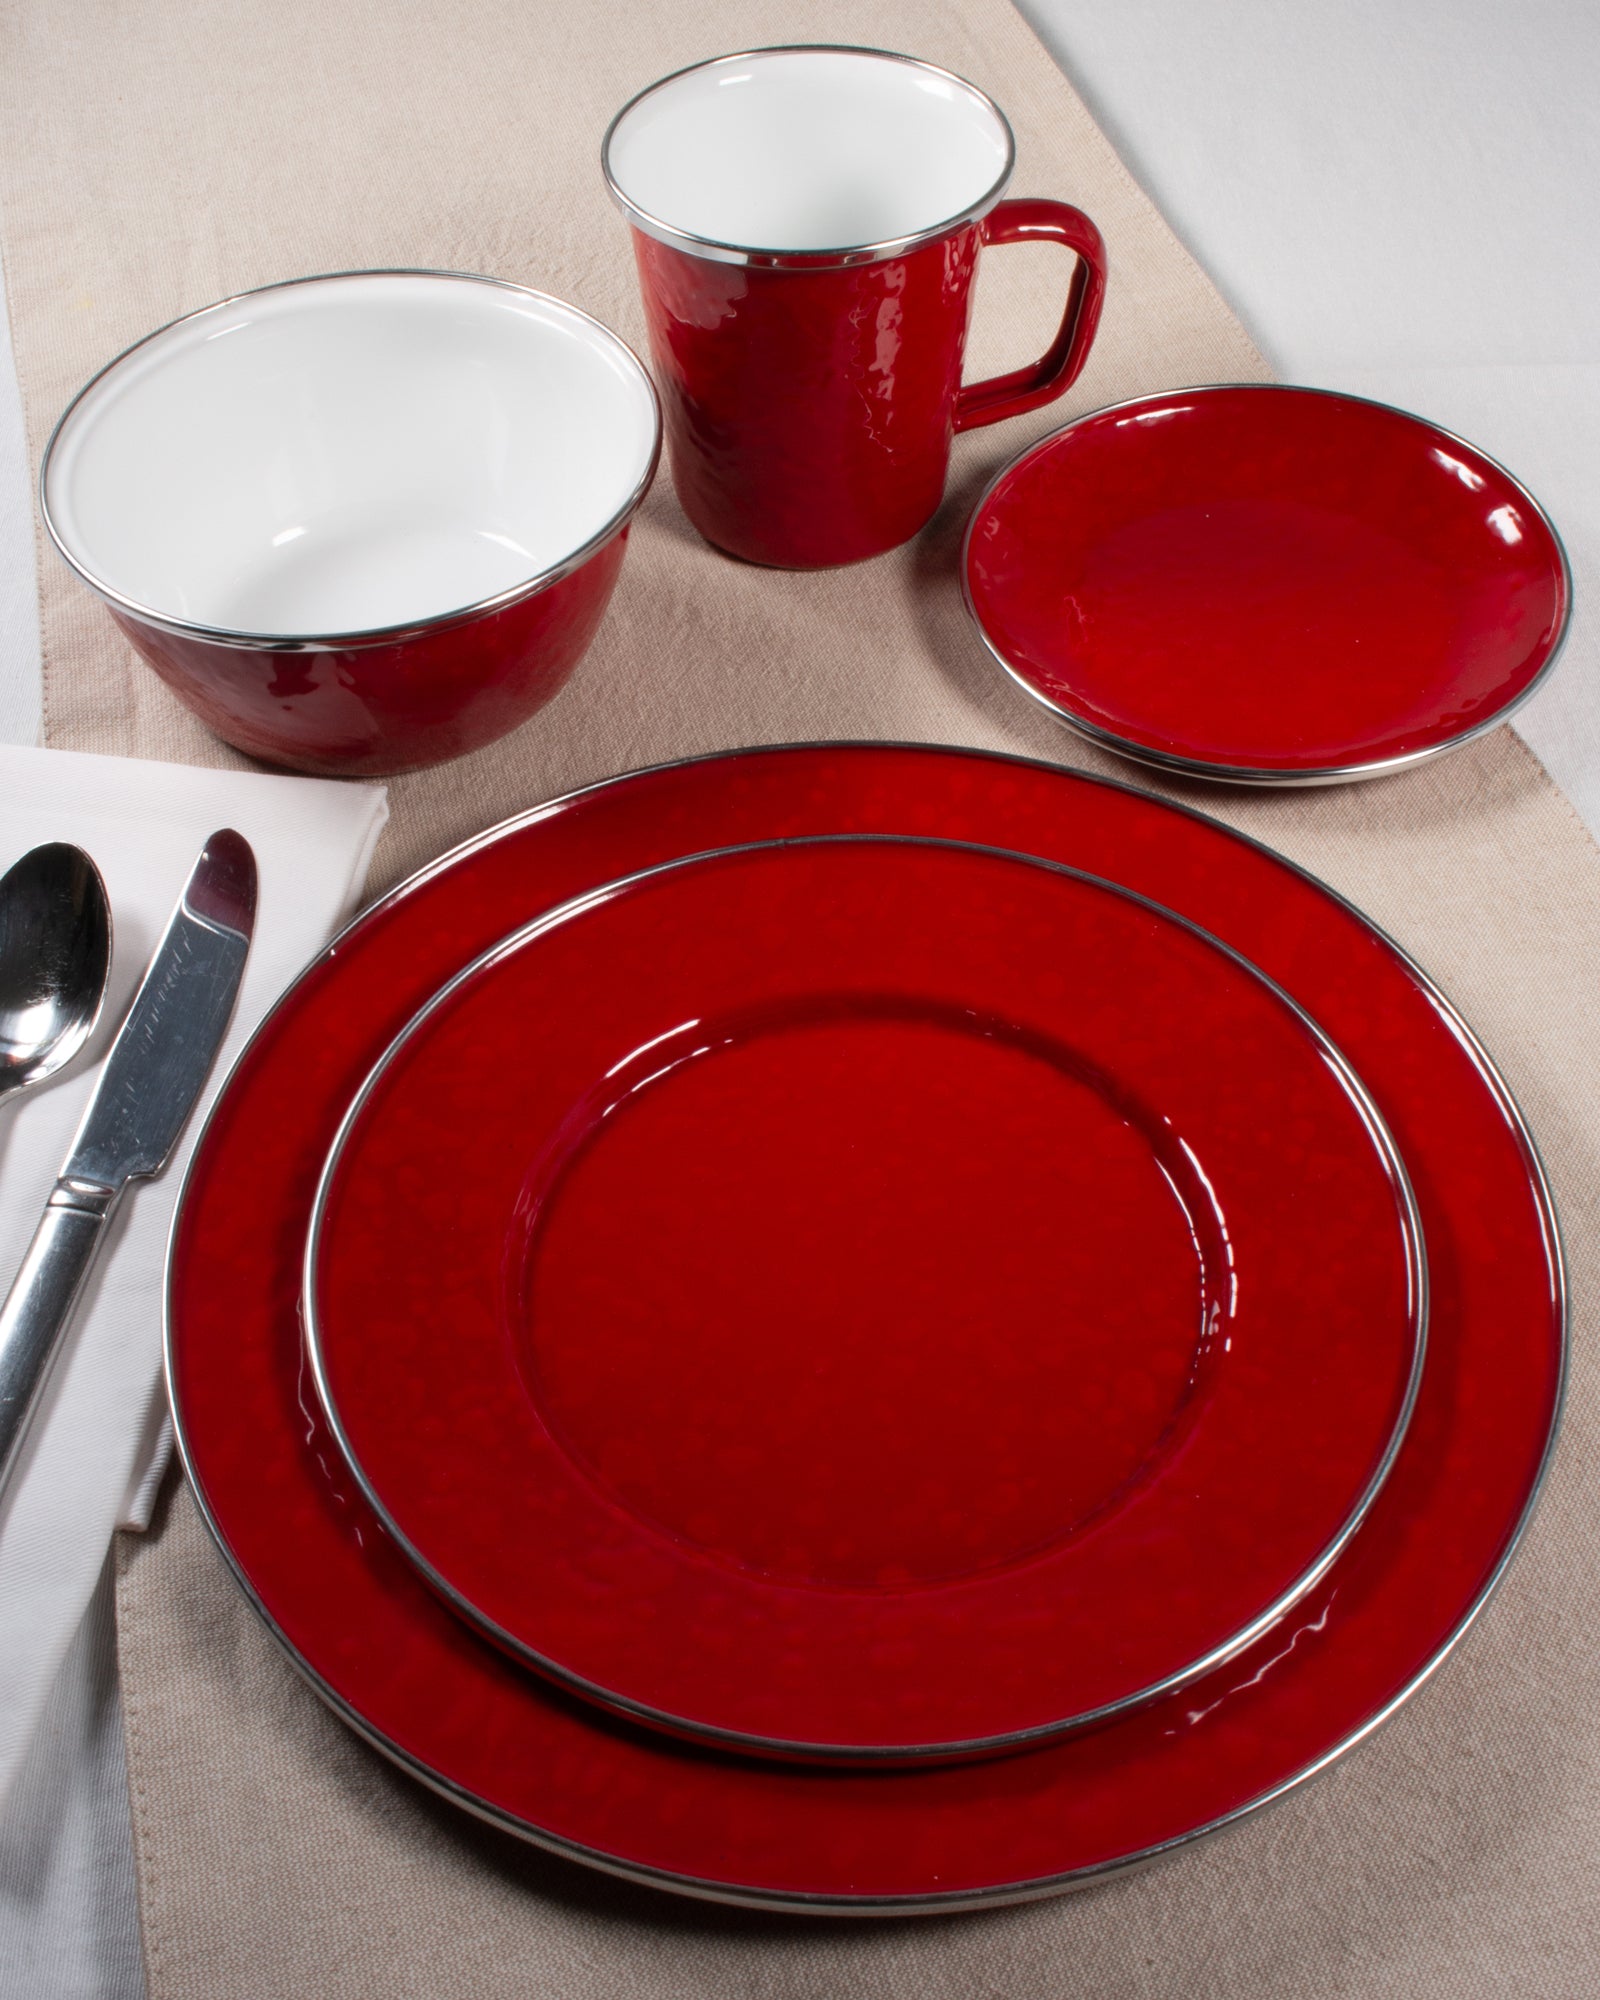 Solid Red Large Saute Pan by Golden Rabbit